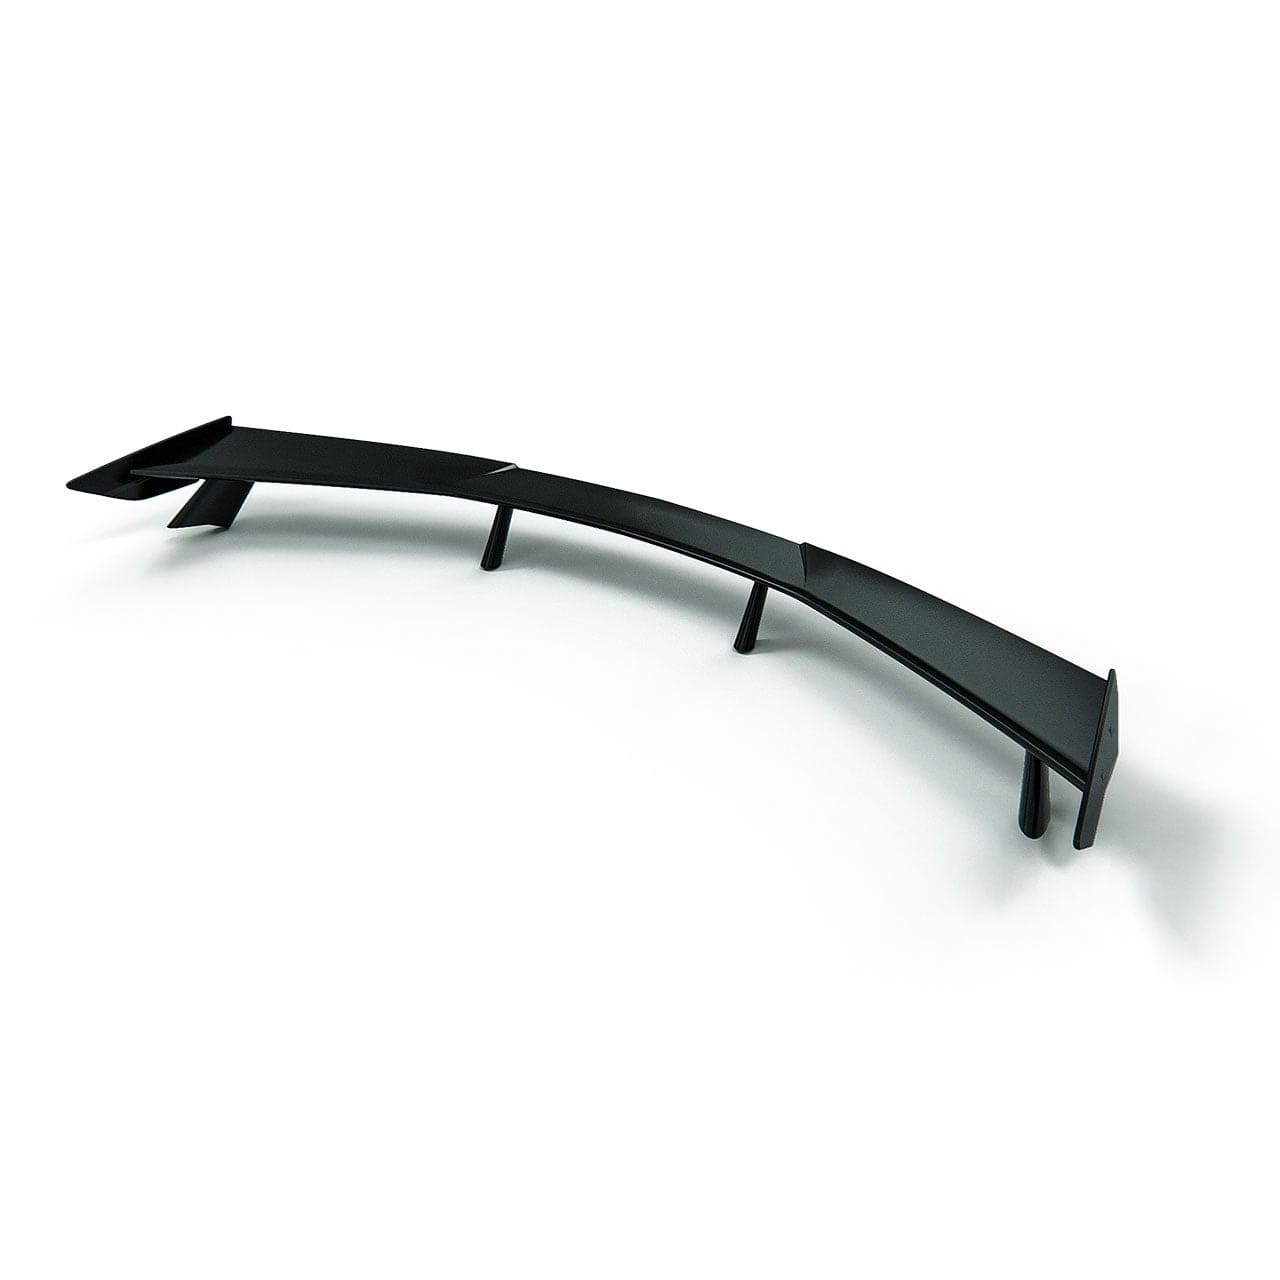 C8 High Wing Spoiler in Gloss Black [50-4-009]GBA - ACS Composite.